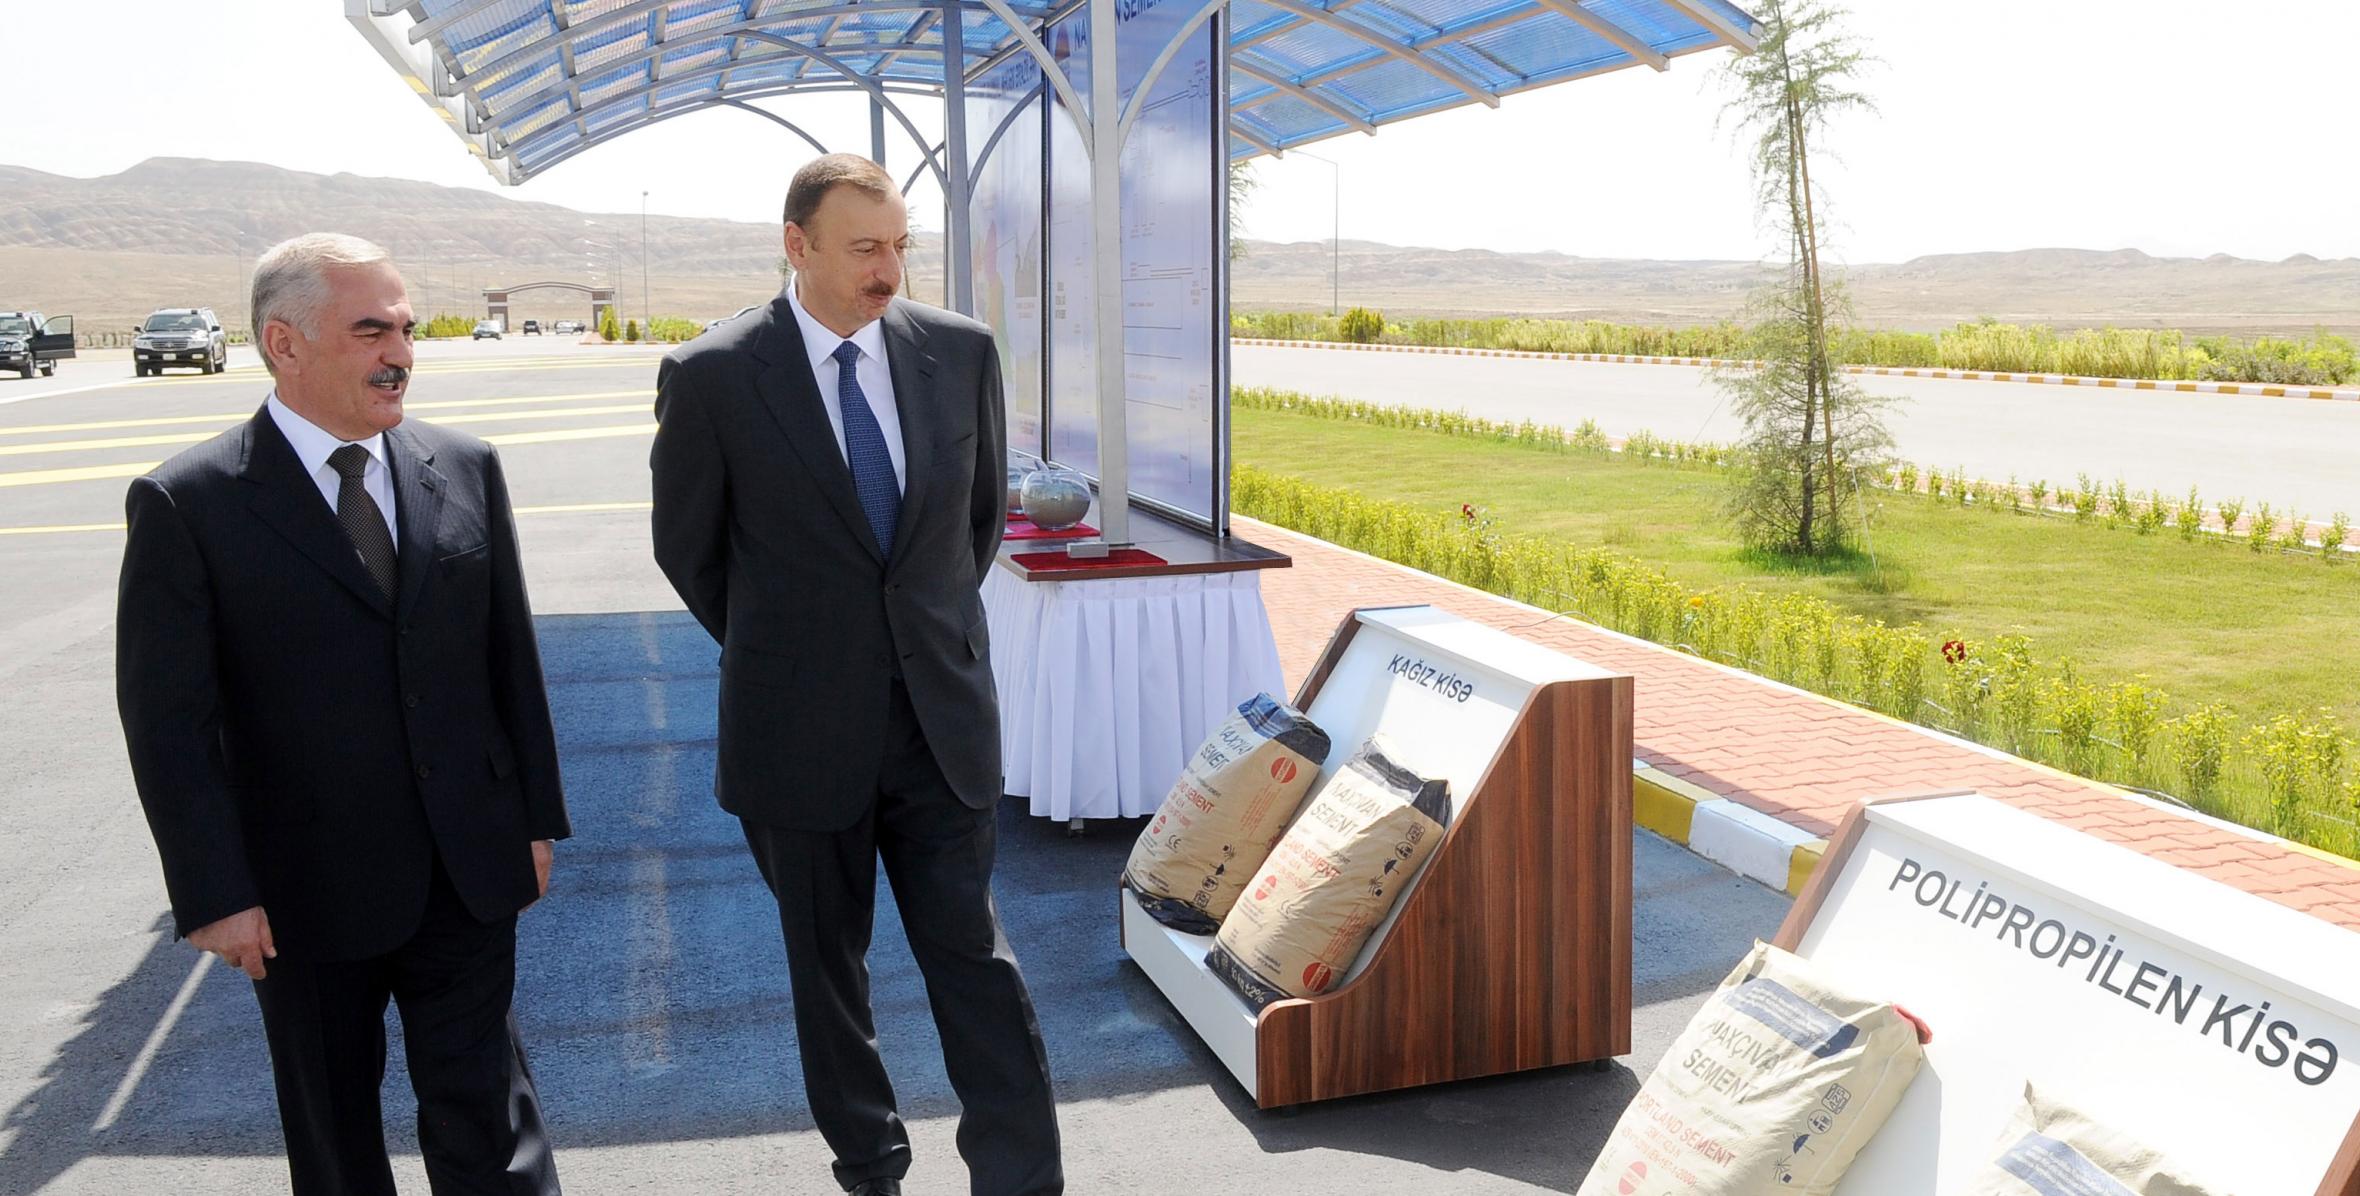 Ilham Aliyev attended the opening of the Nakhchivan cement plant